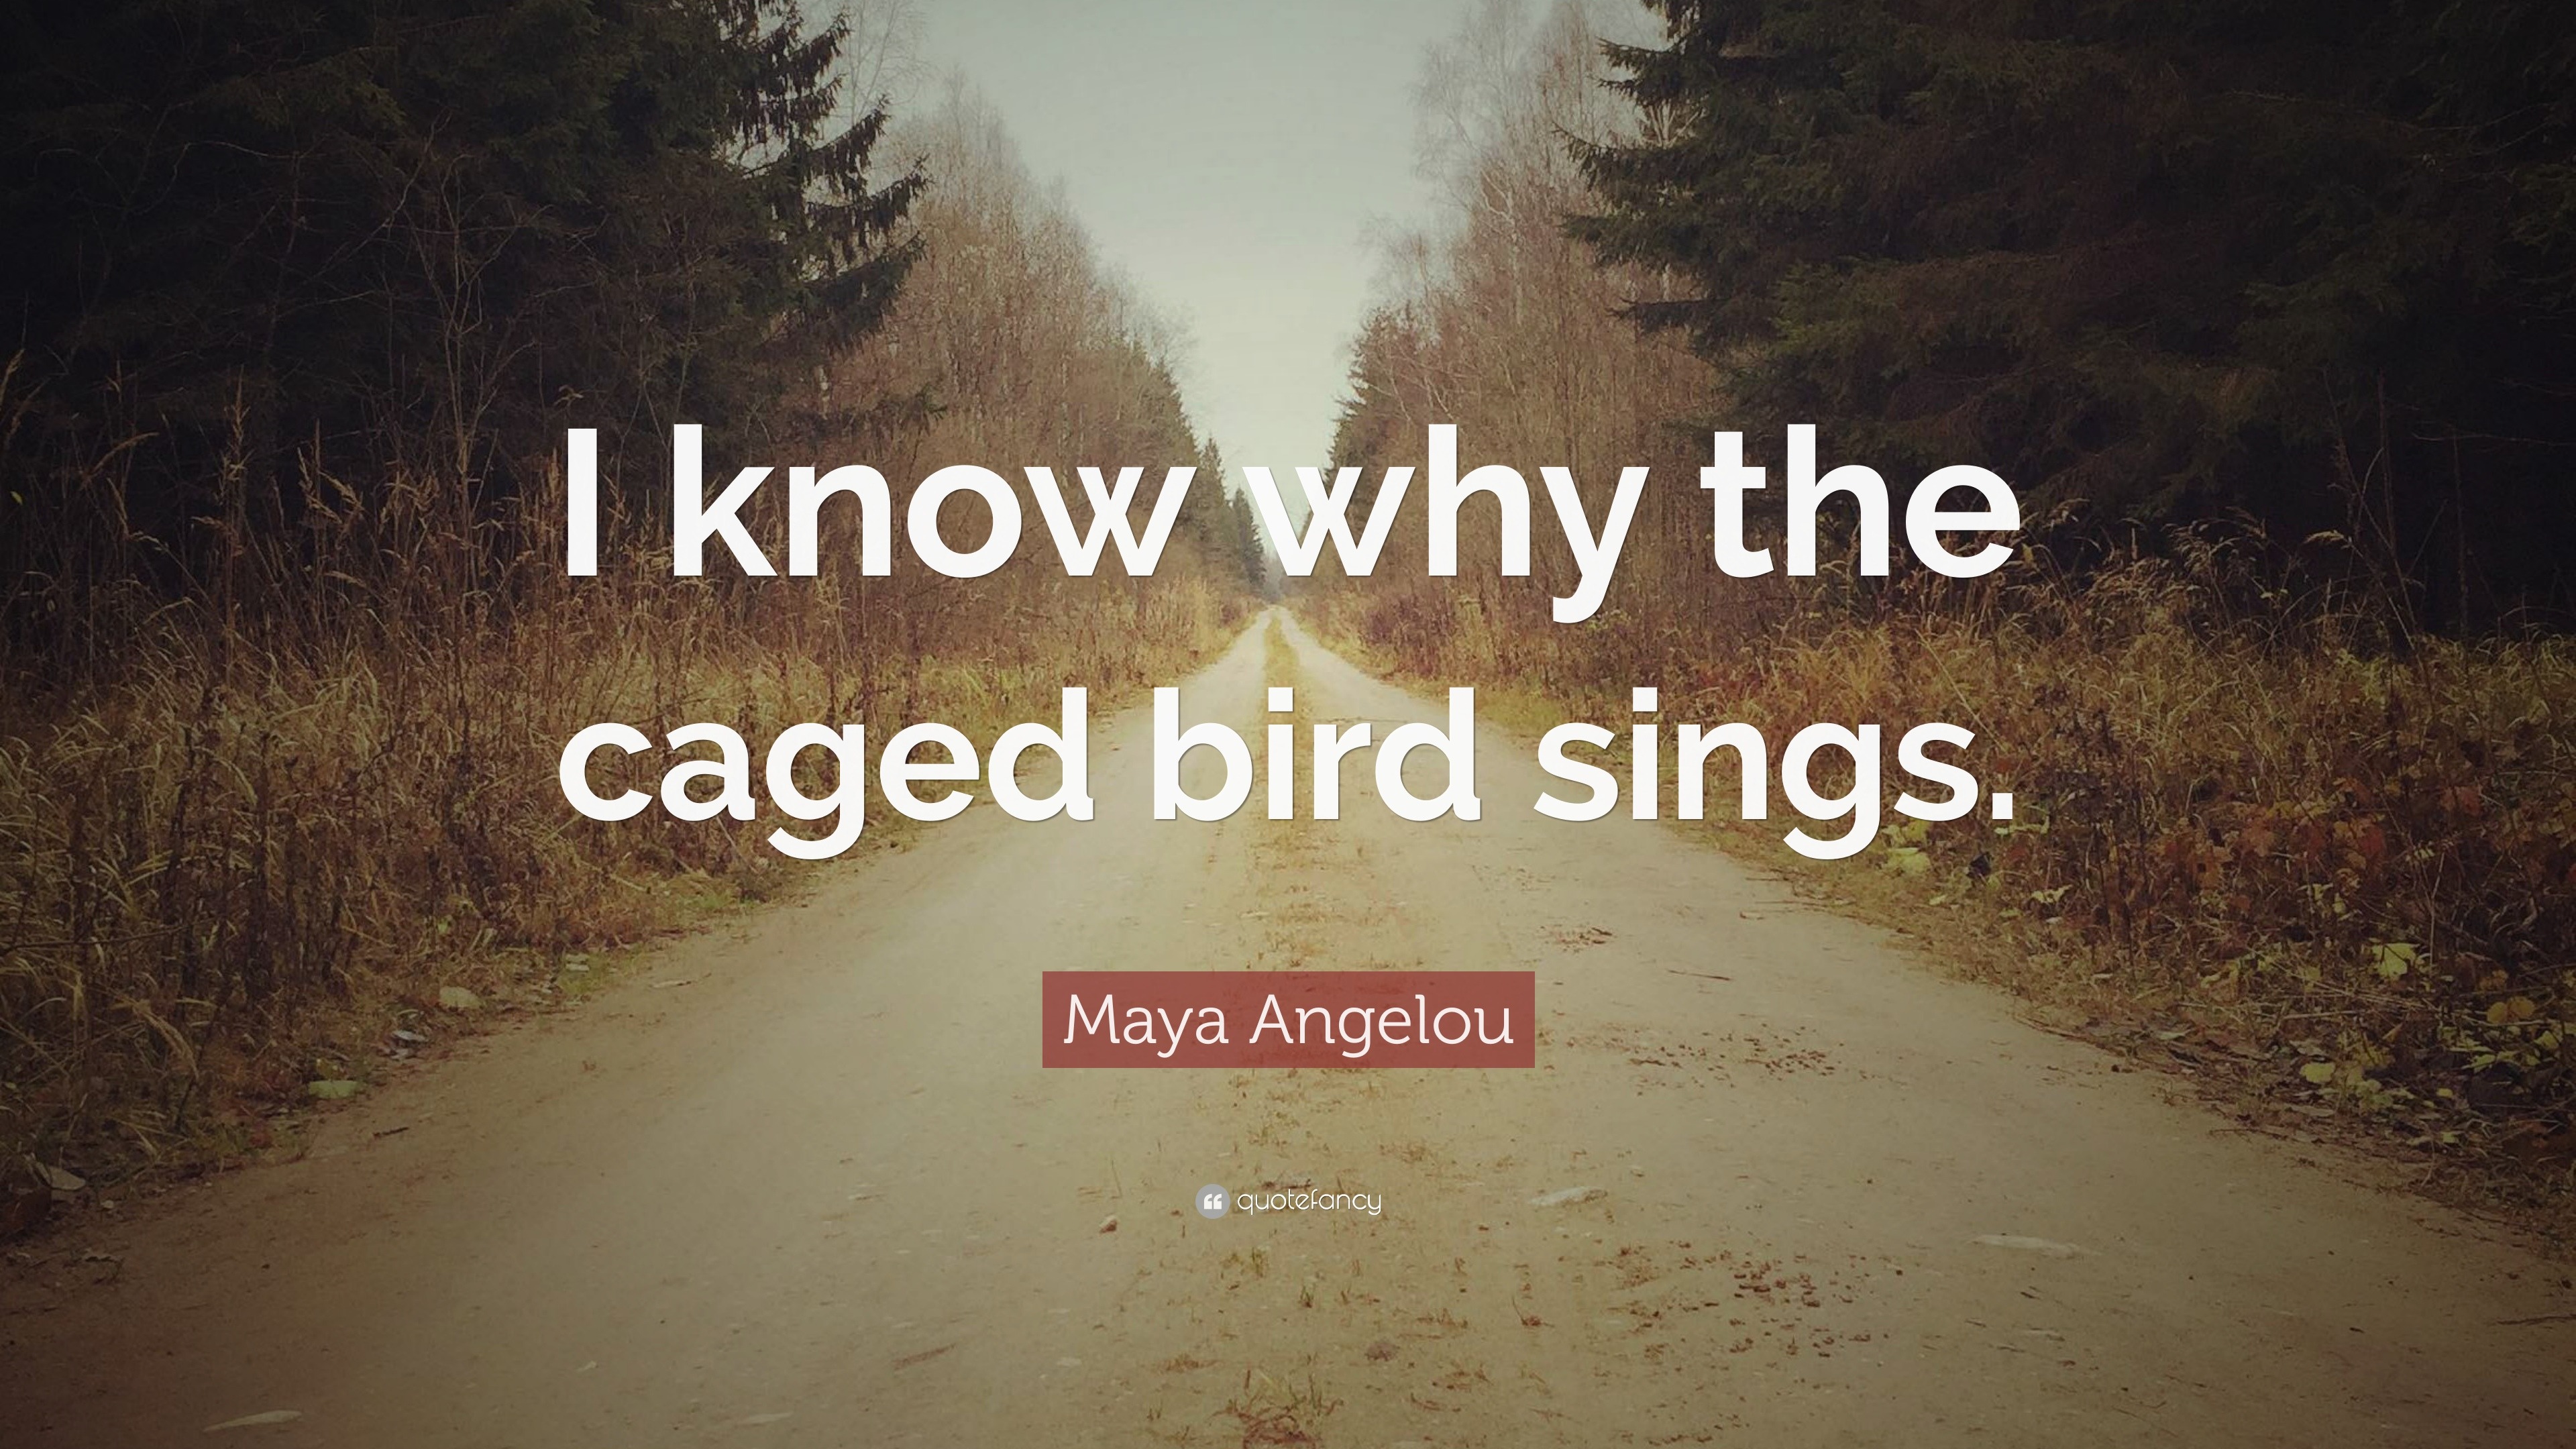 I know why the caged bird sings quotes and explanations